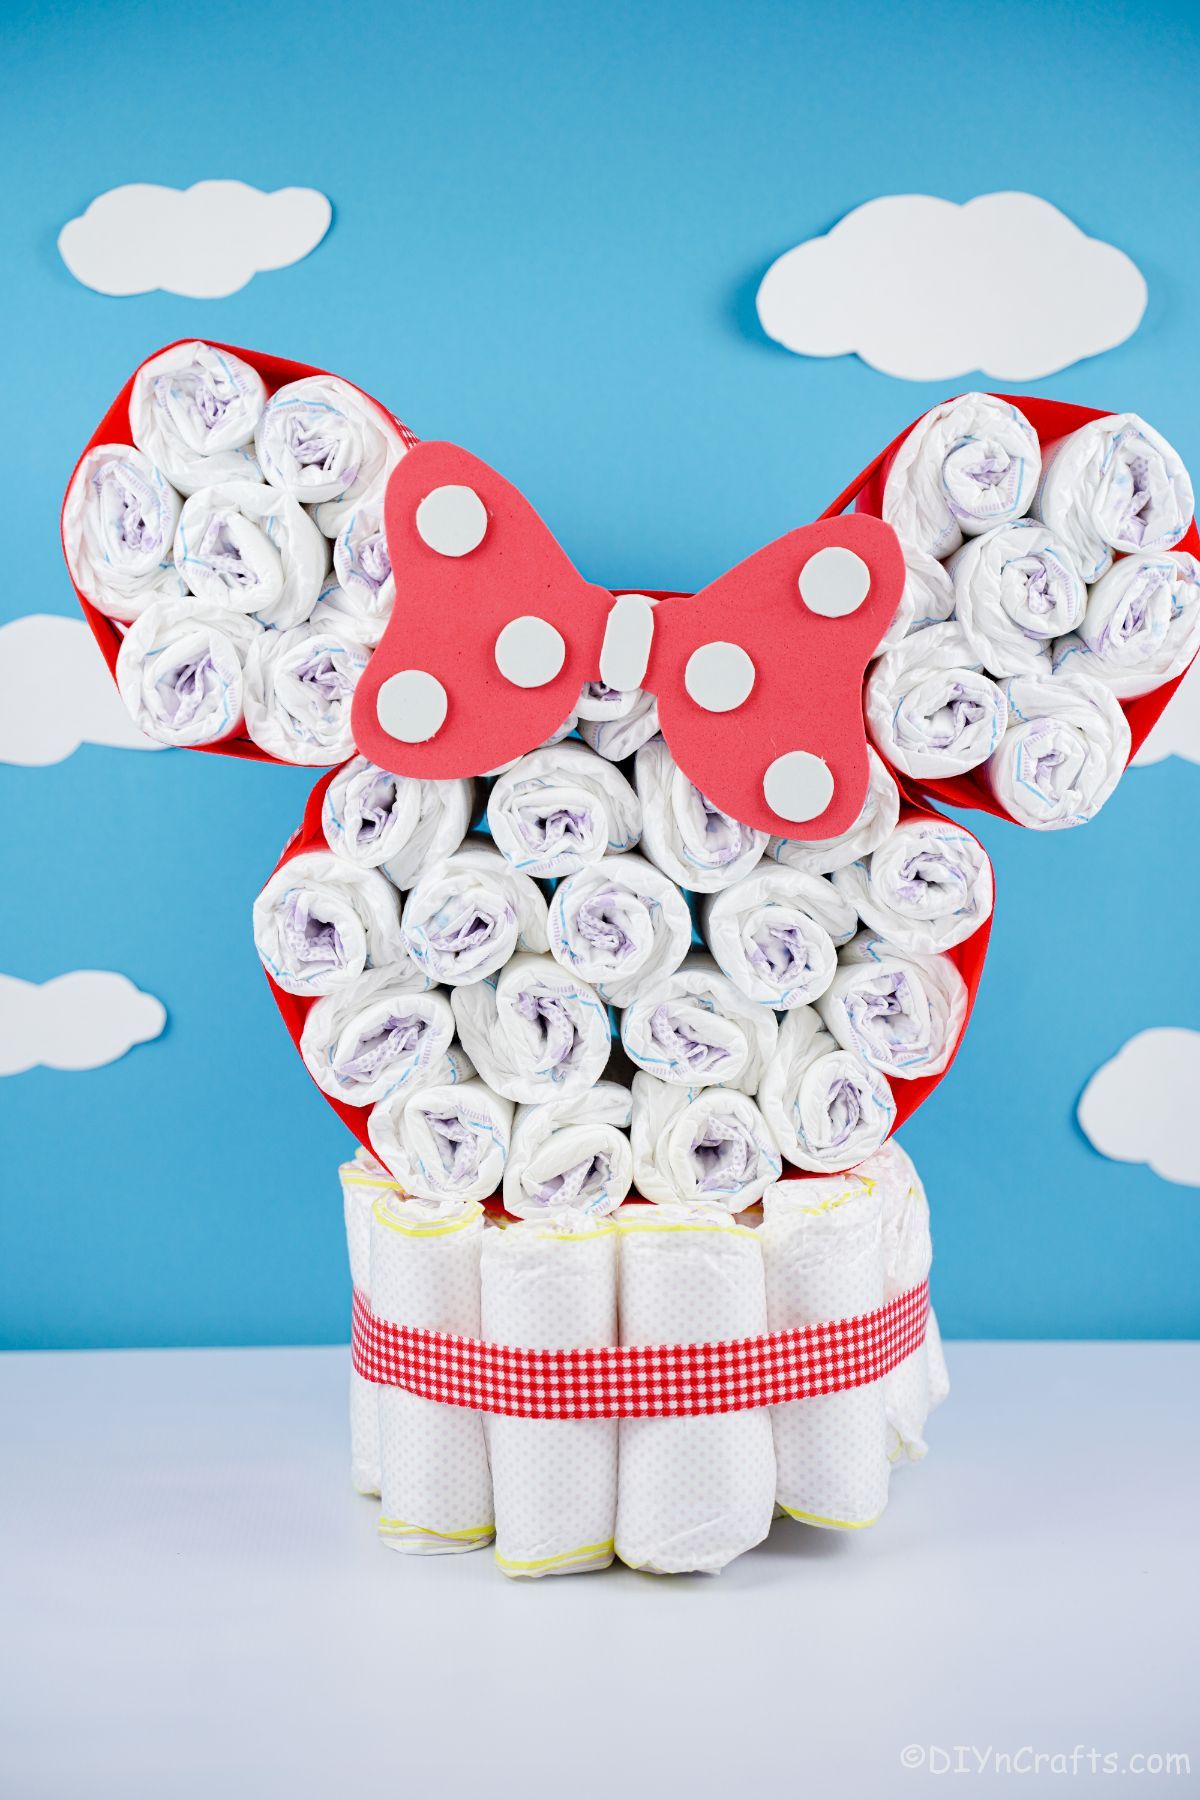 Disney diaper cake in front of white and blue wall